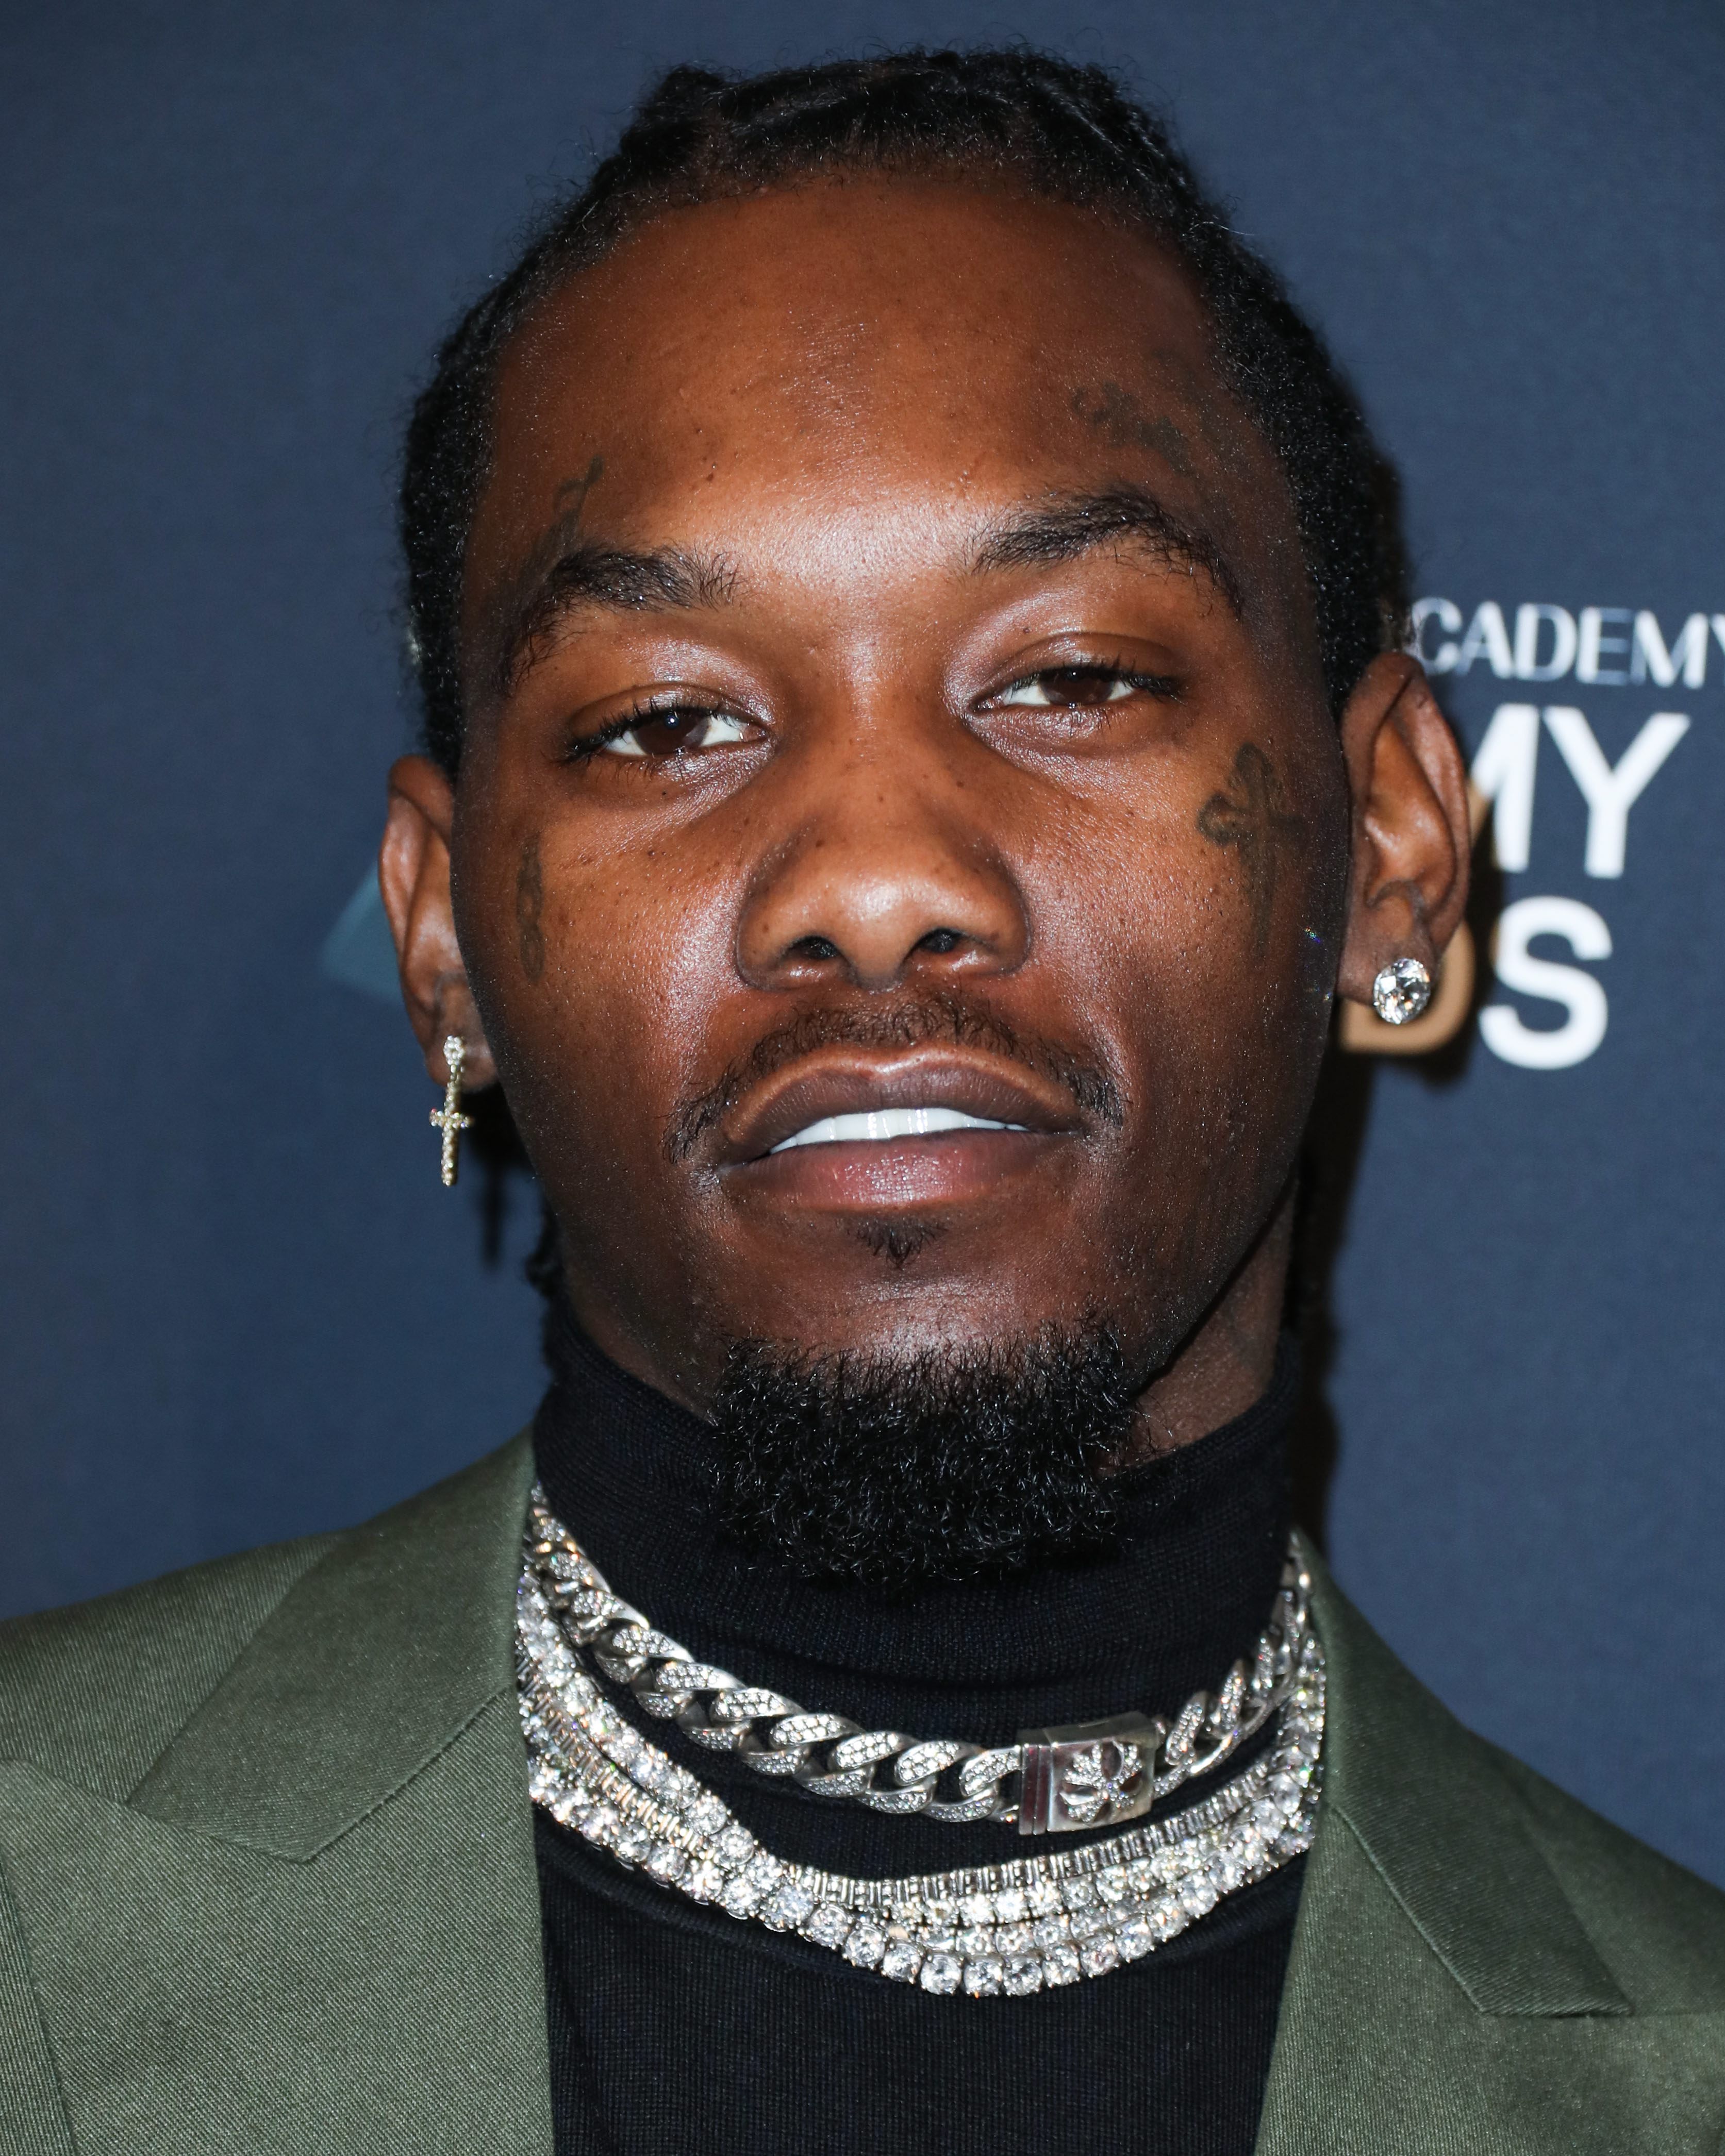 Offset arrives at The Recording Academy And Clive Davis' 2020 Pre-GRAMMY Gala held at The Beverly Hilton Hotel on January 25, 2020 in Beverly Hills, Los Angeles, California, United States.